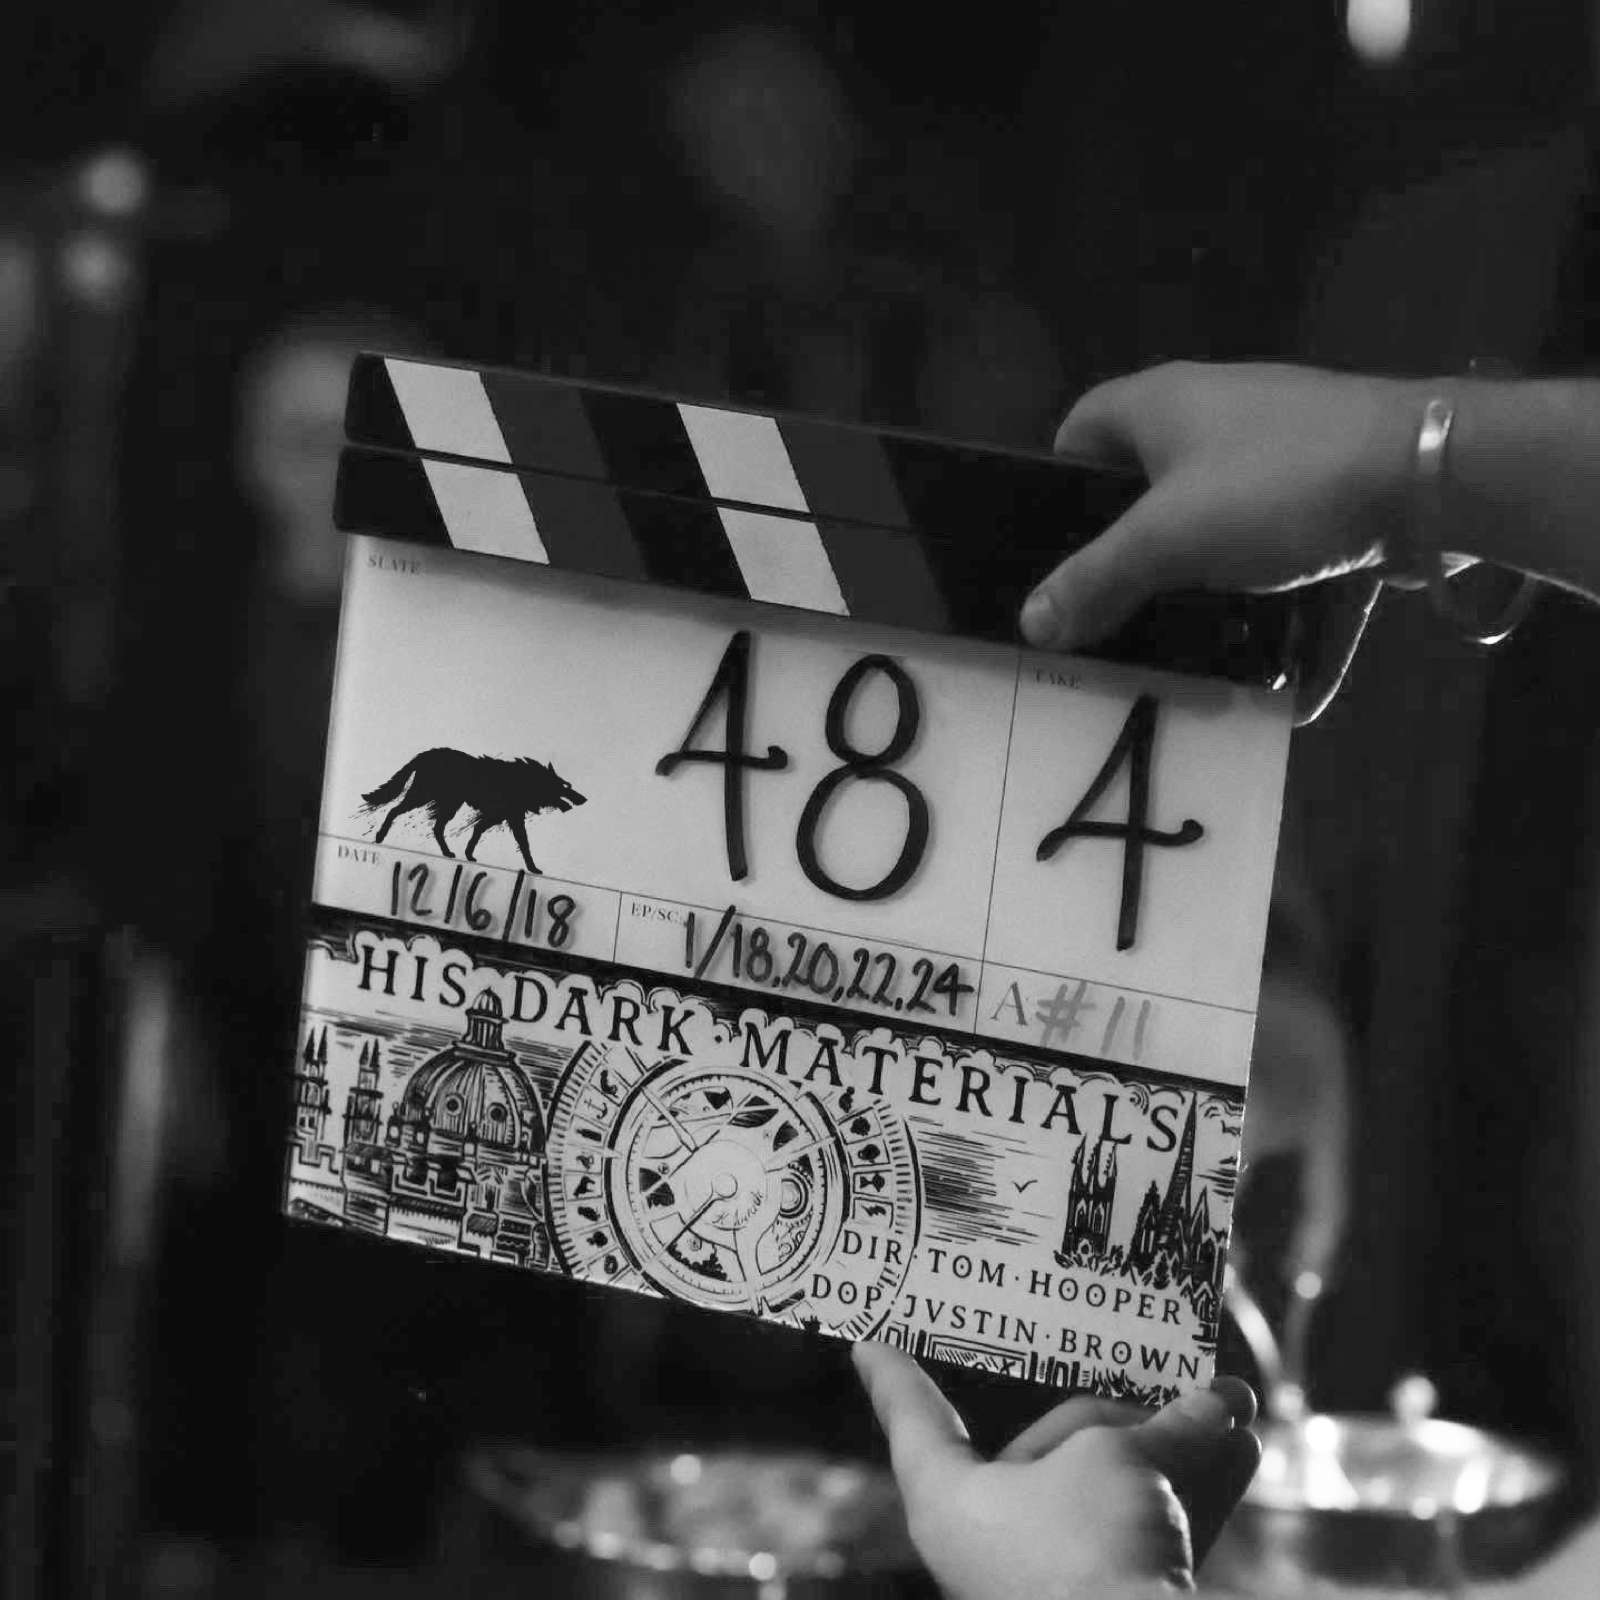 A monochrome image of a person holding a clapperboard for the TV series 